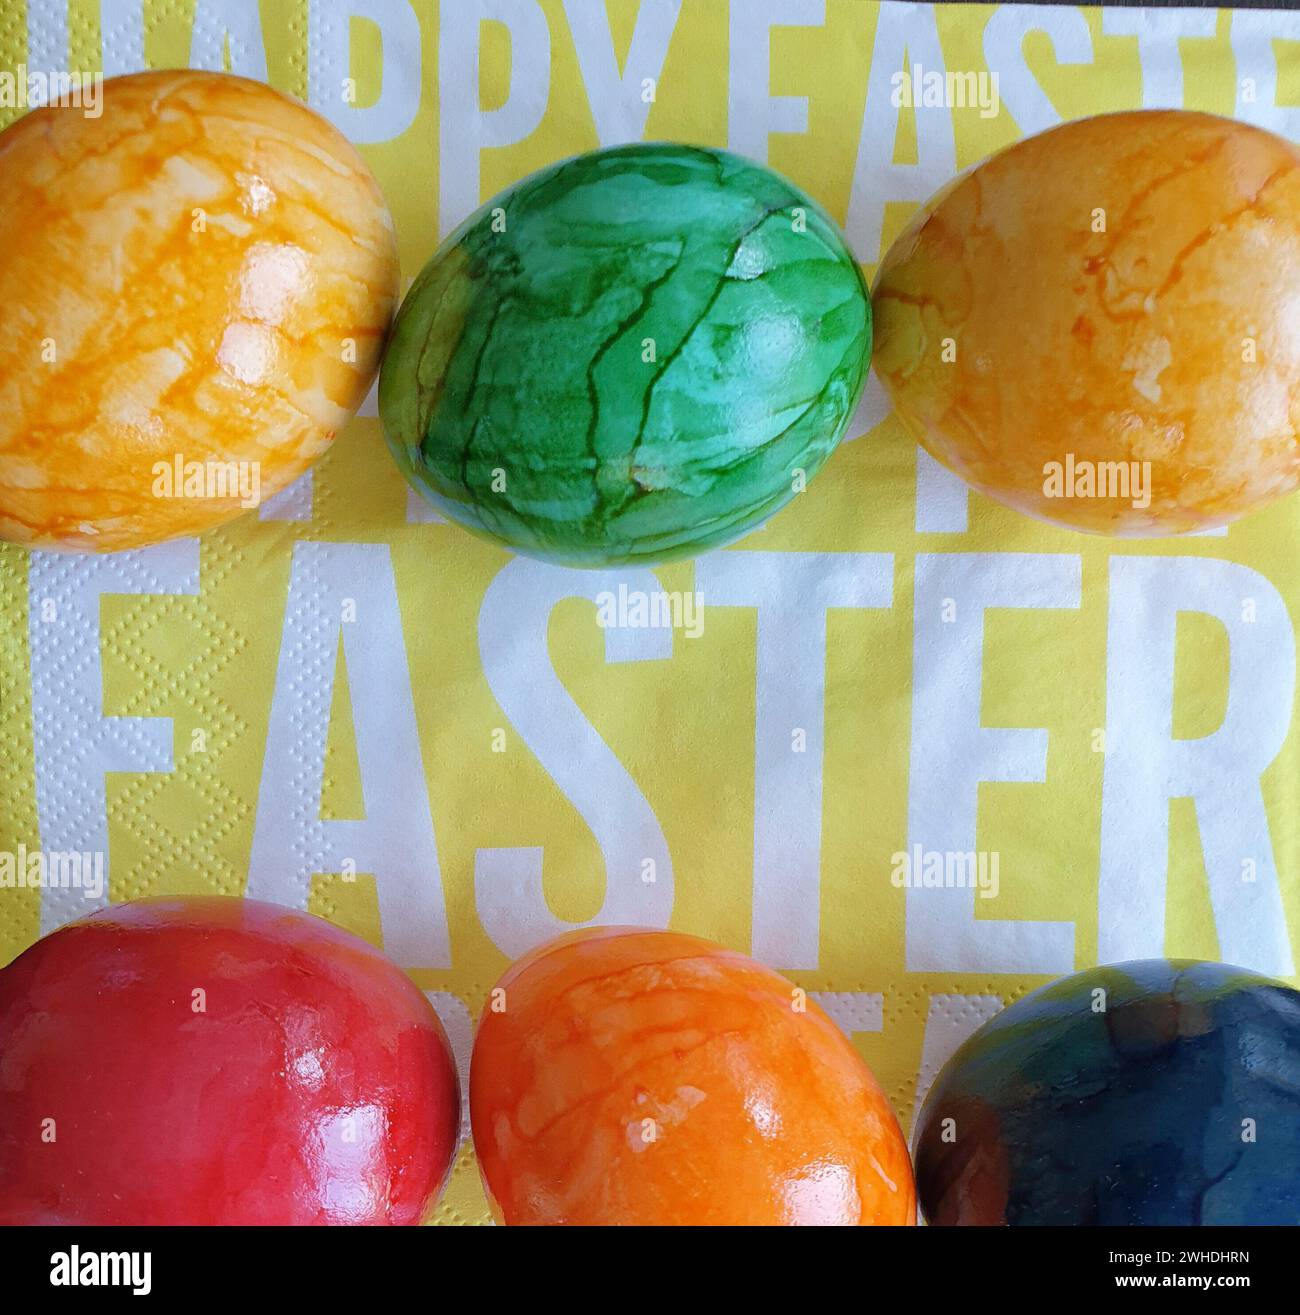 Boiled colorful eggs in the egg colors yellow green blue and red lie on a yellow napkin with white lettering for Easter Stock Photo